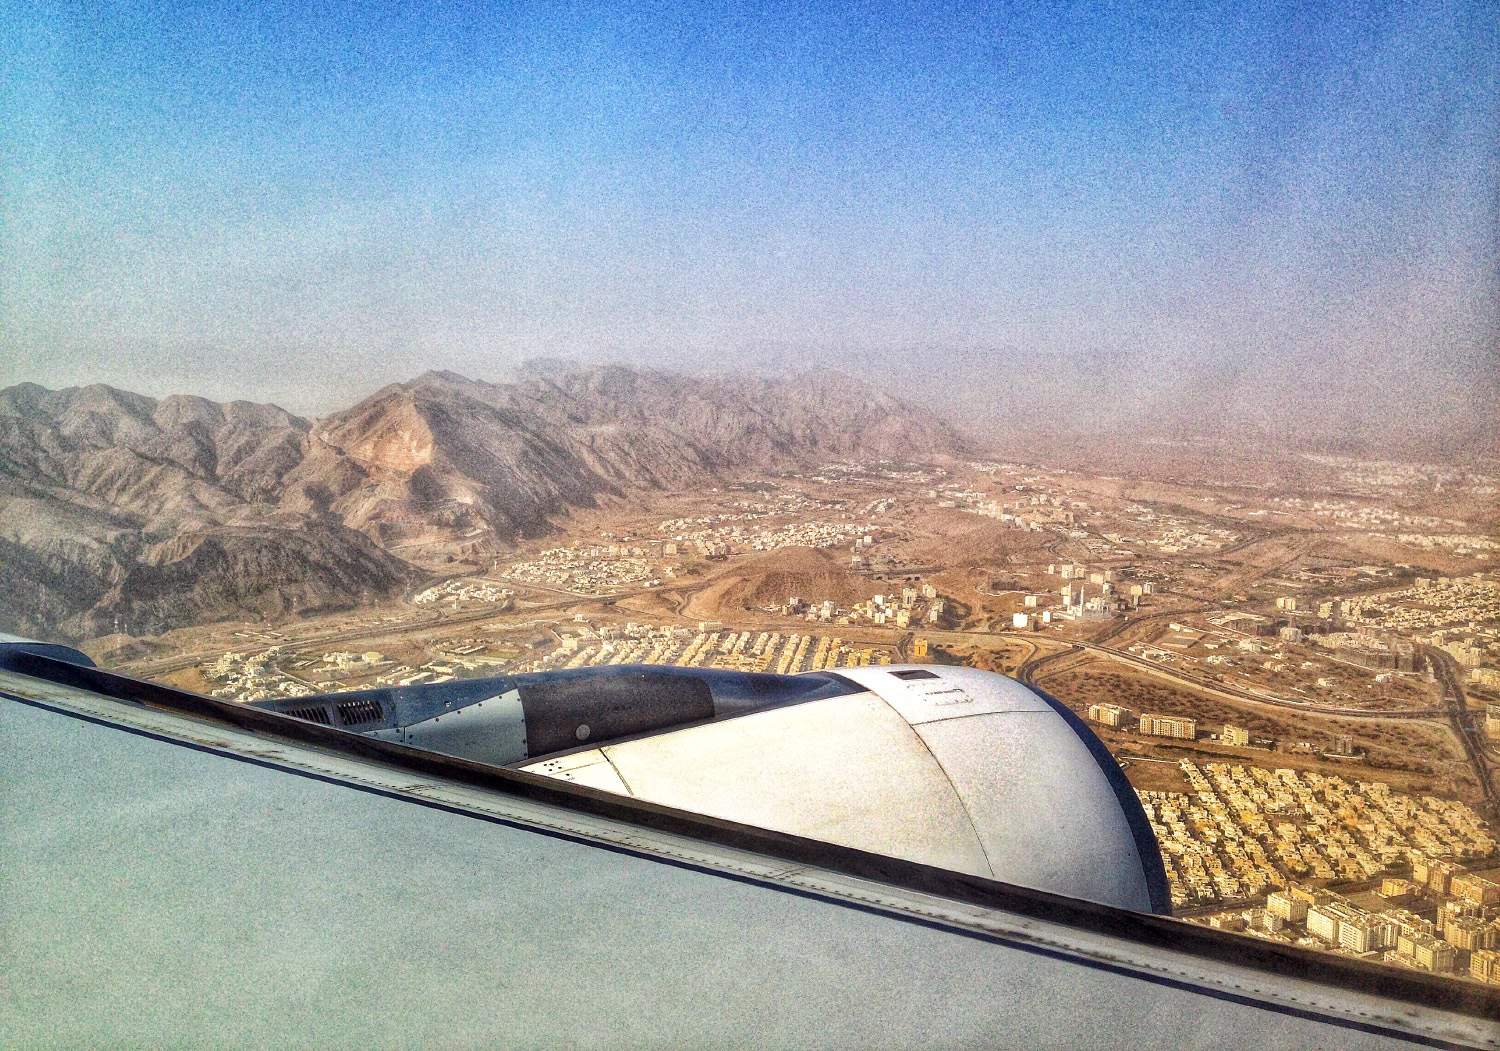 Coming in to land in Muscat, Oman